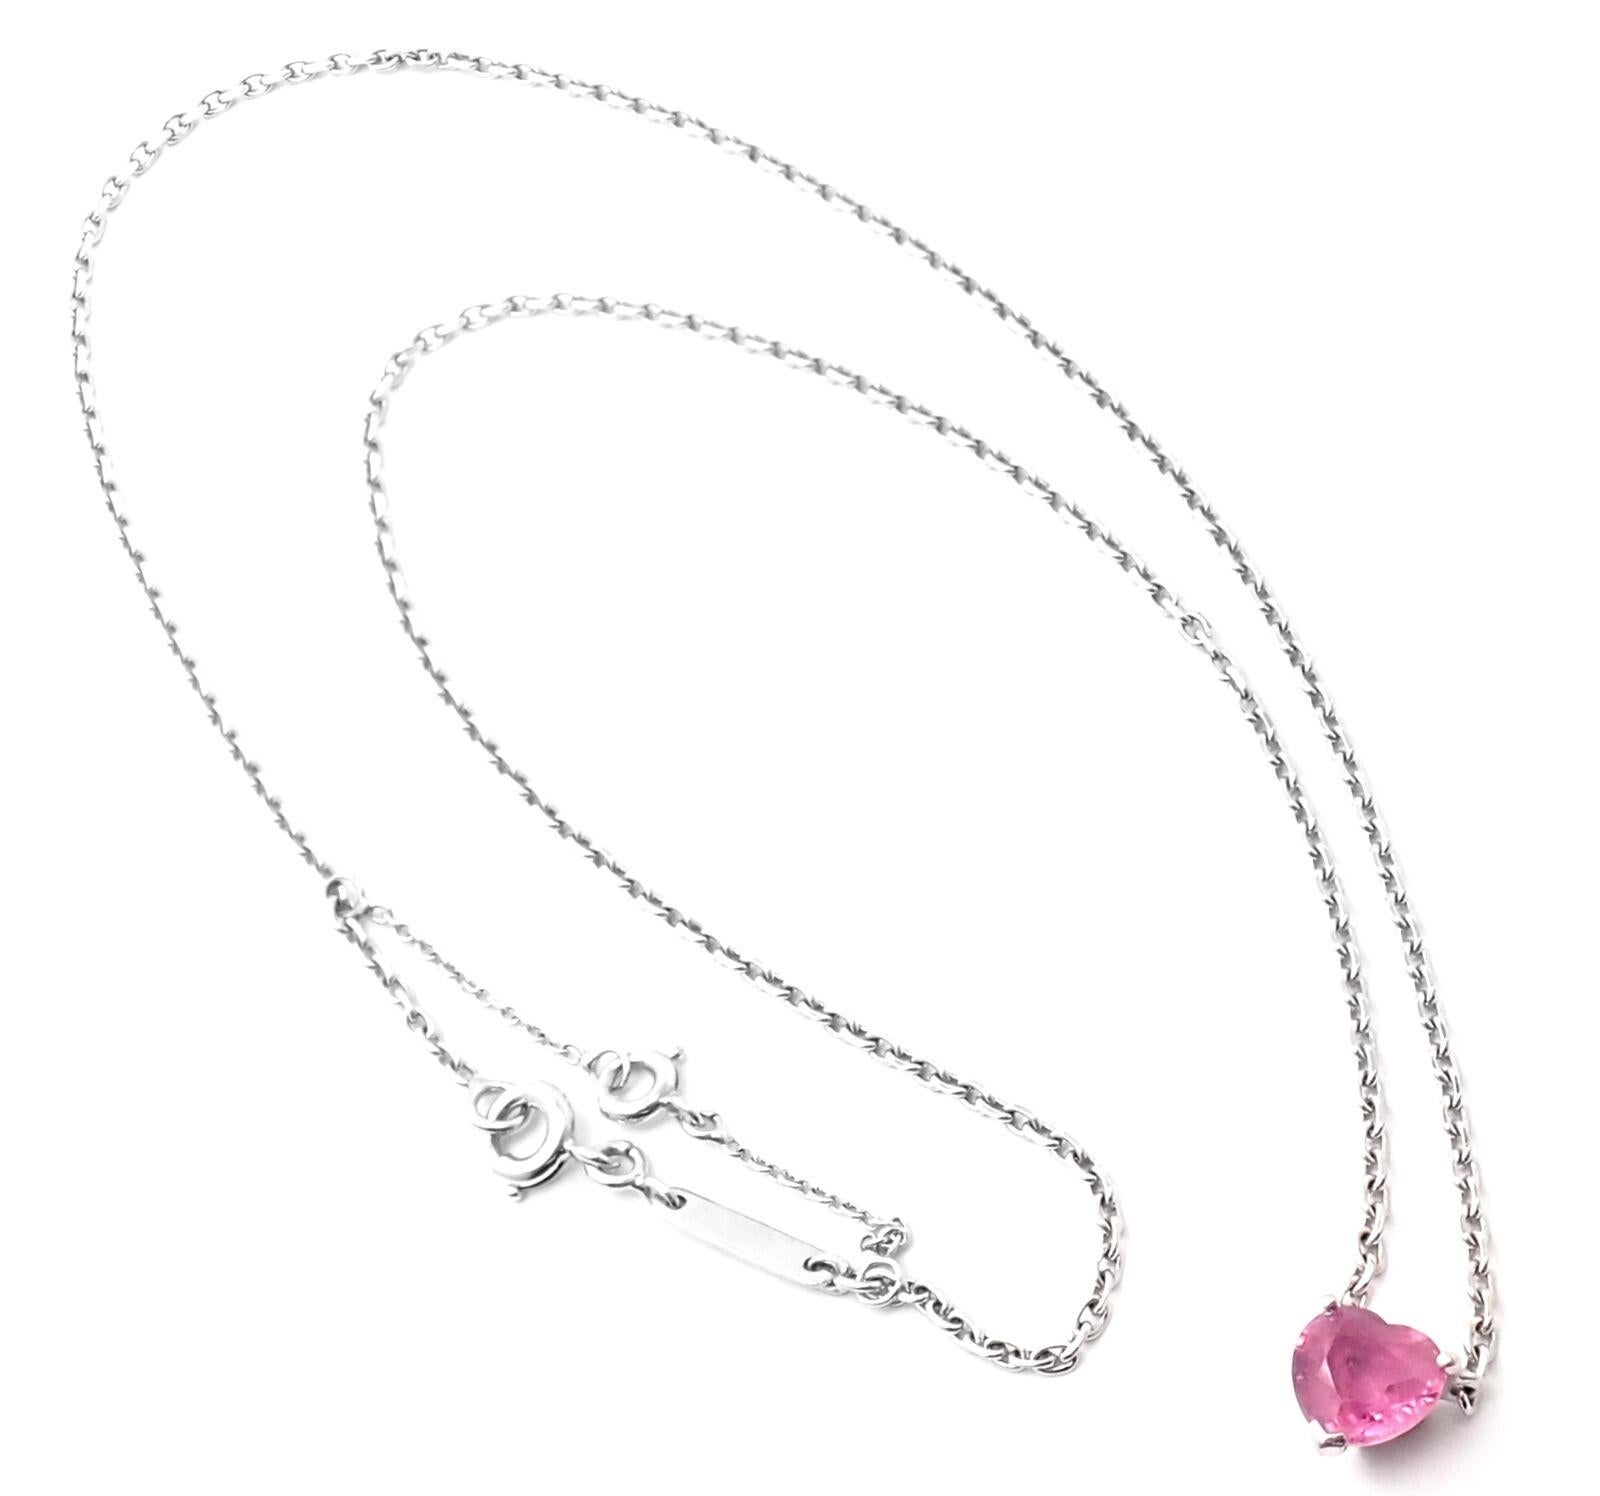 18k White Gold Heart Shaped Pink Sapphire Pendant Necklace by Cartier. 
With 1 heart shape pink sapphire 7mm x 7.5mm  
Details: 
Length: 16